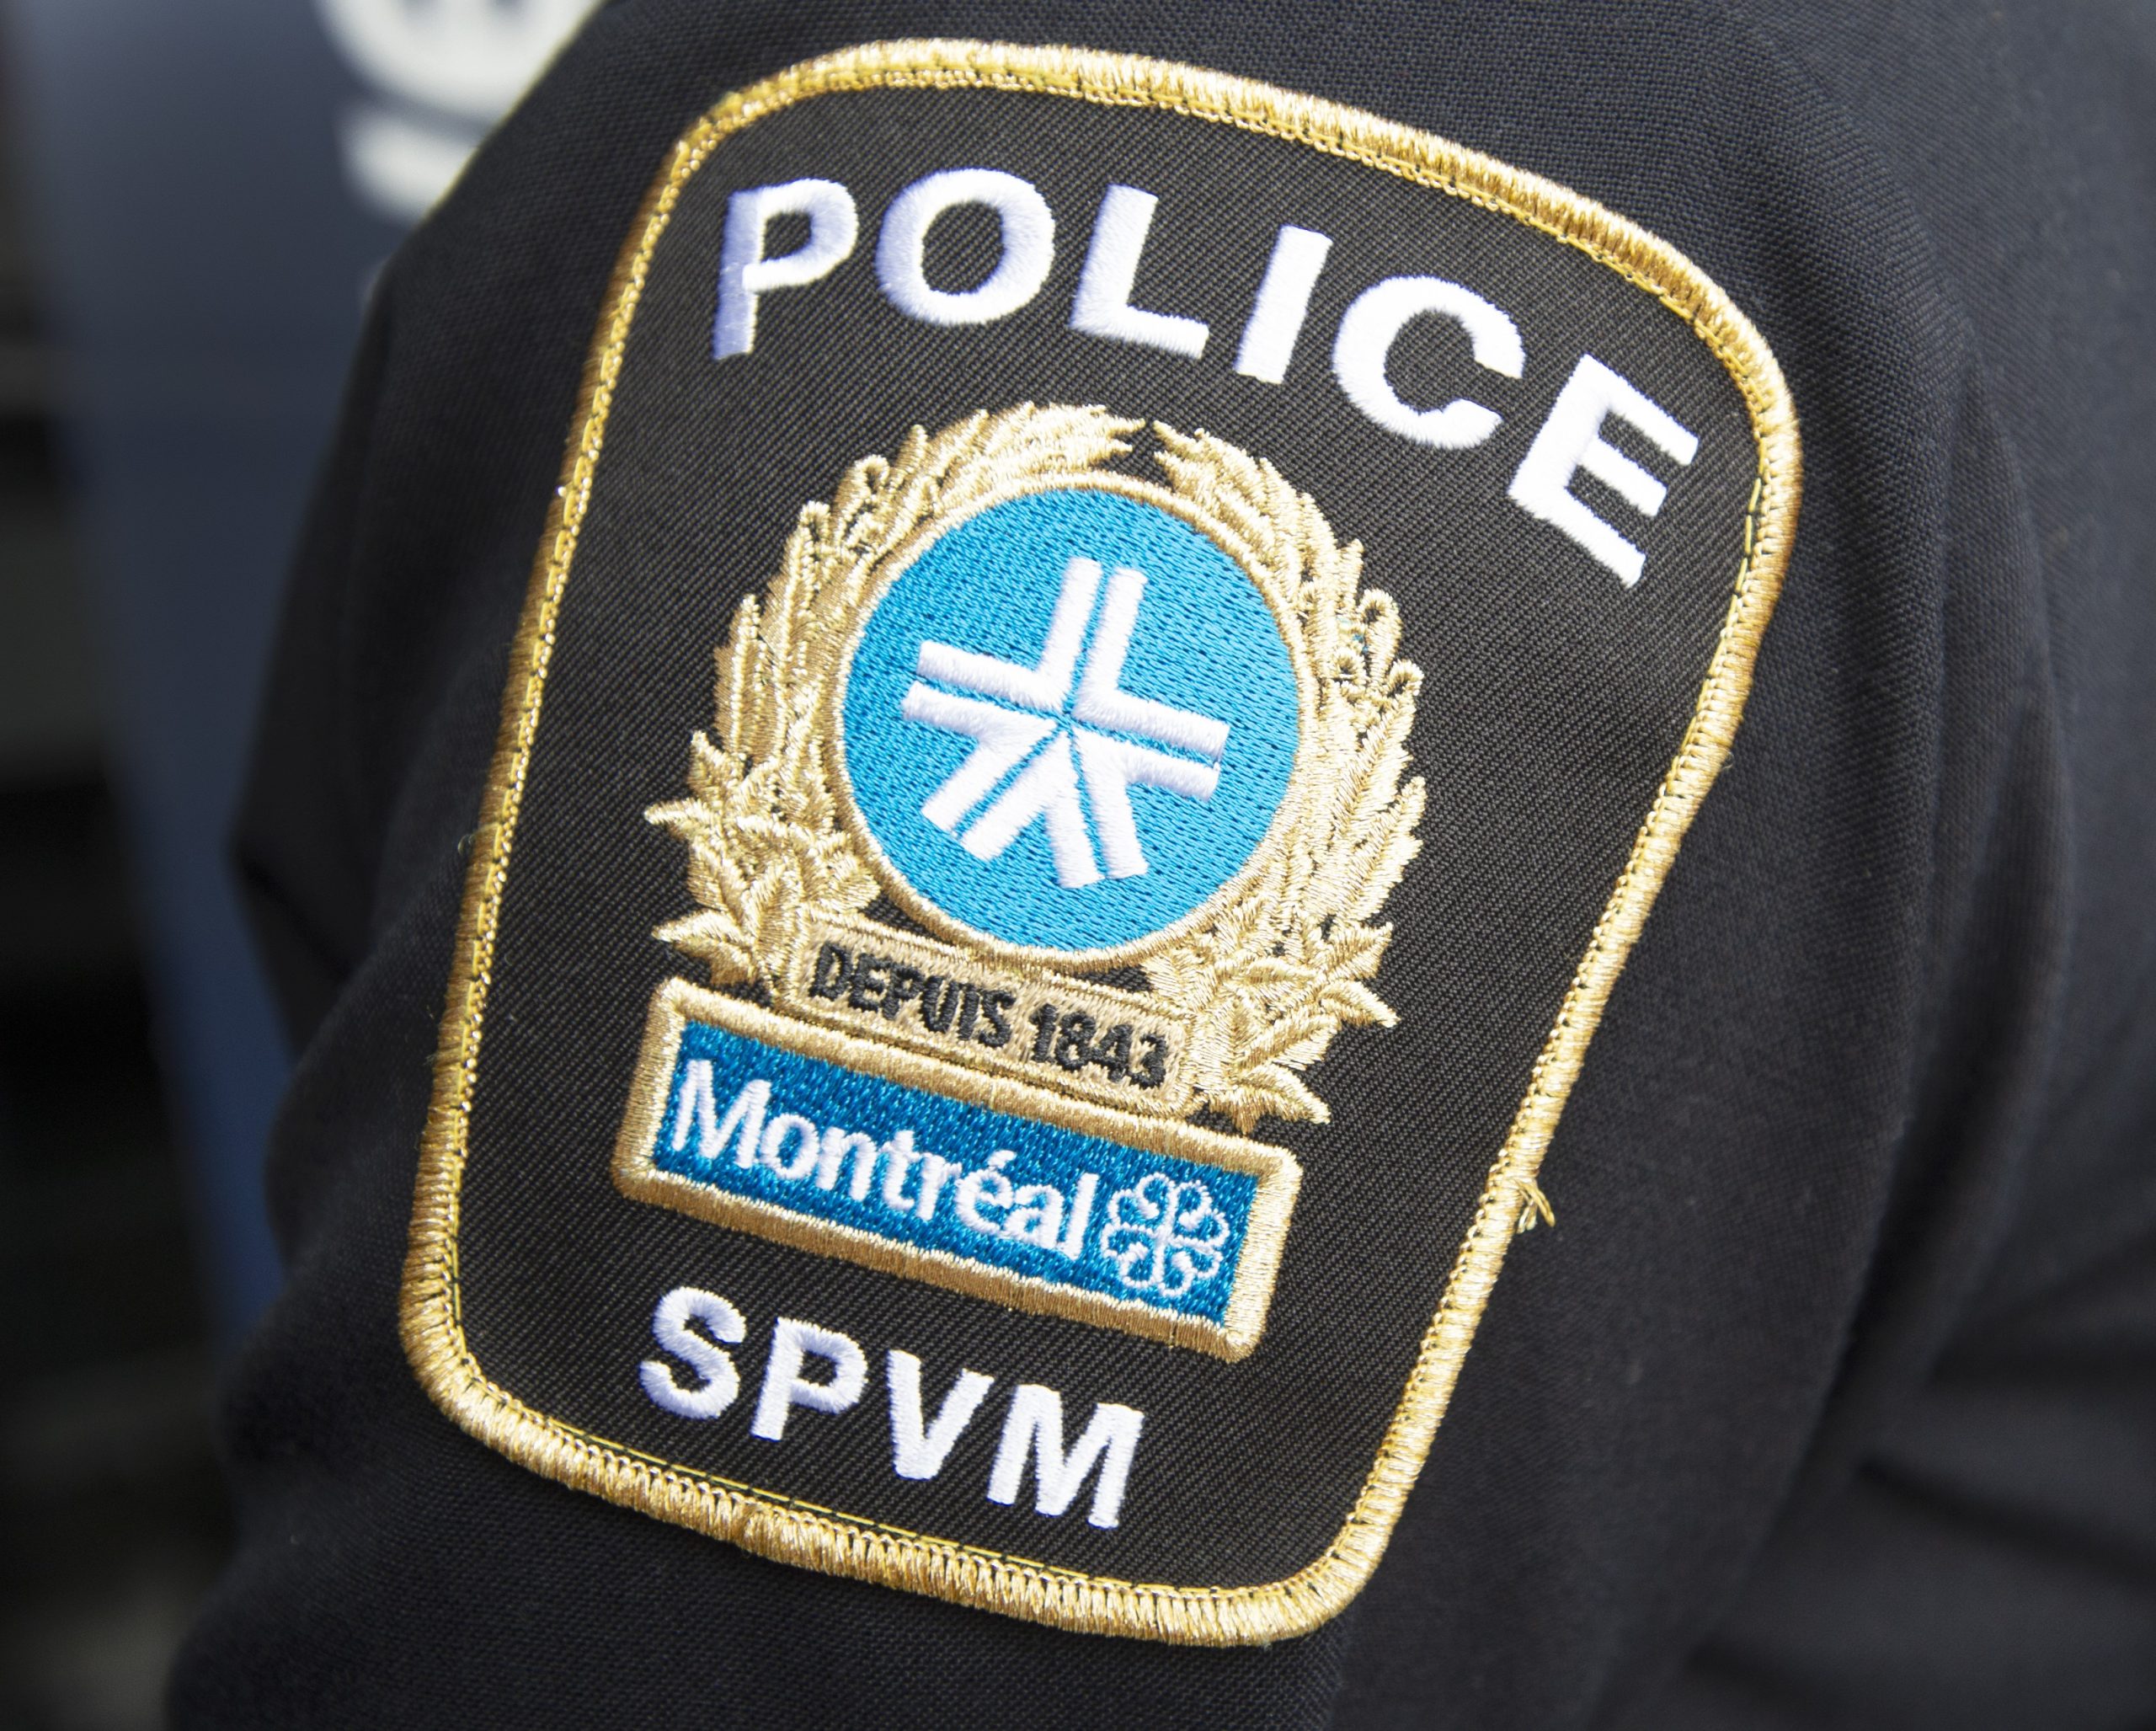 Montreal Police patch